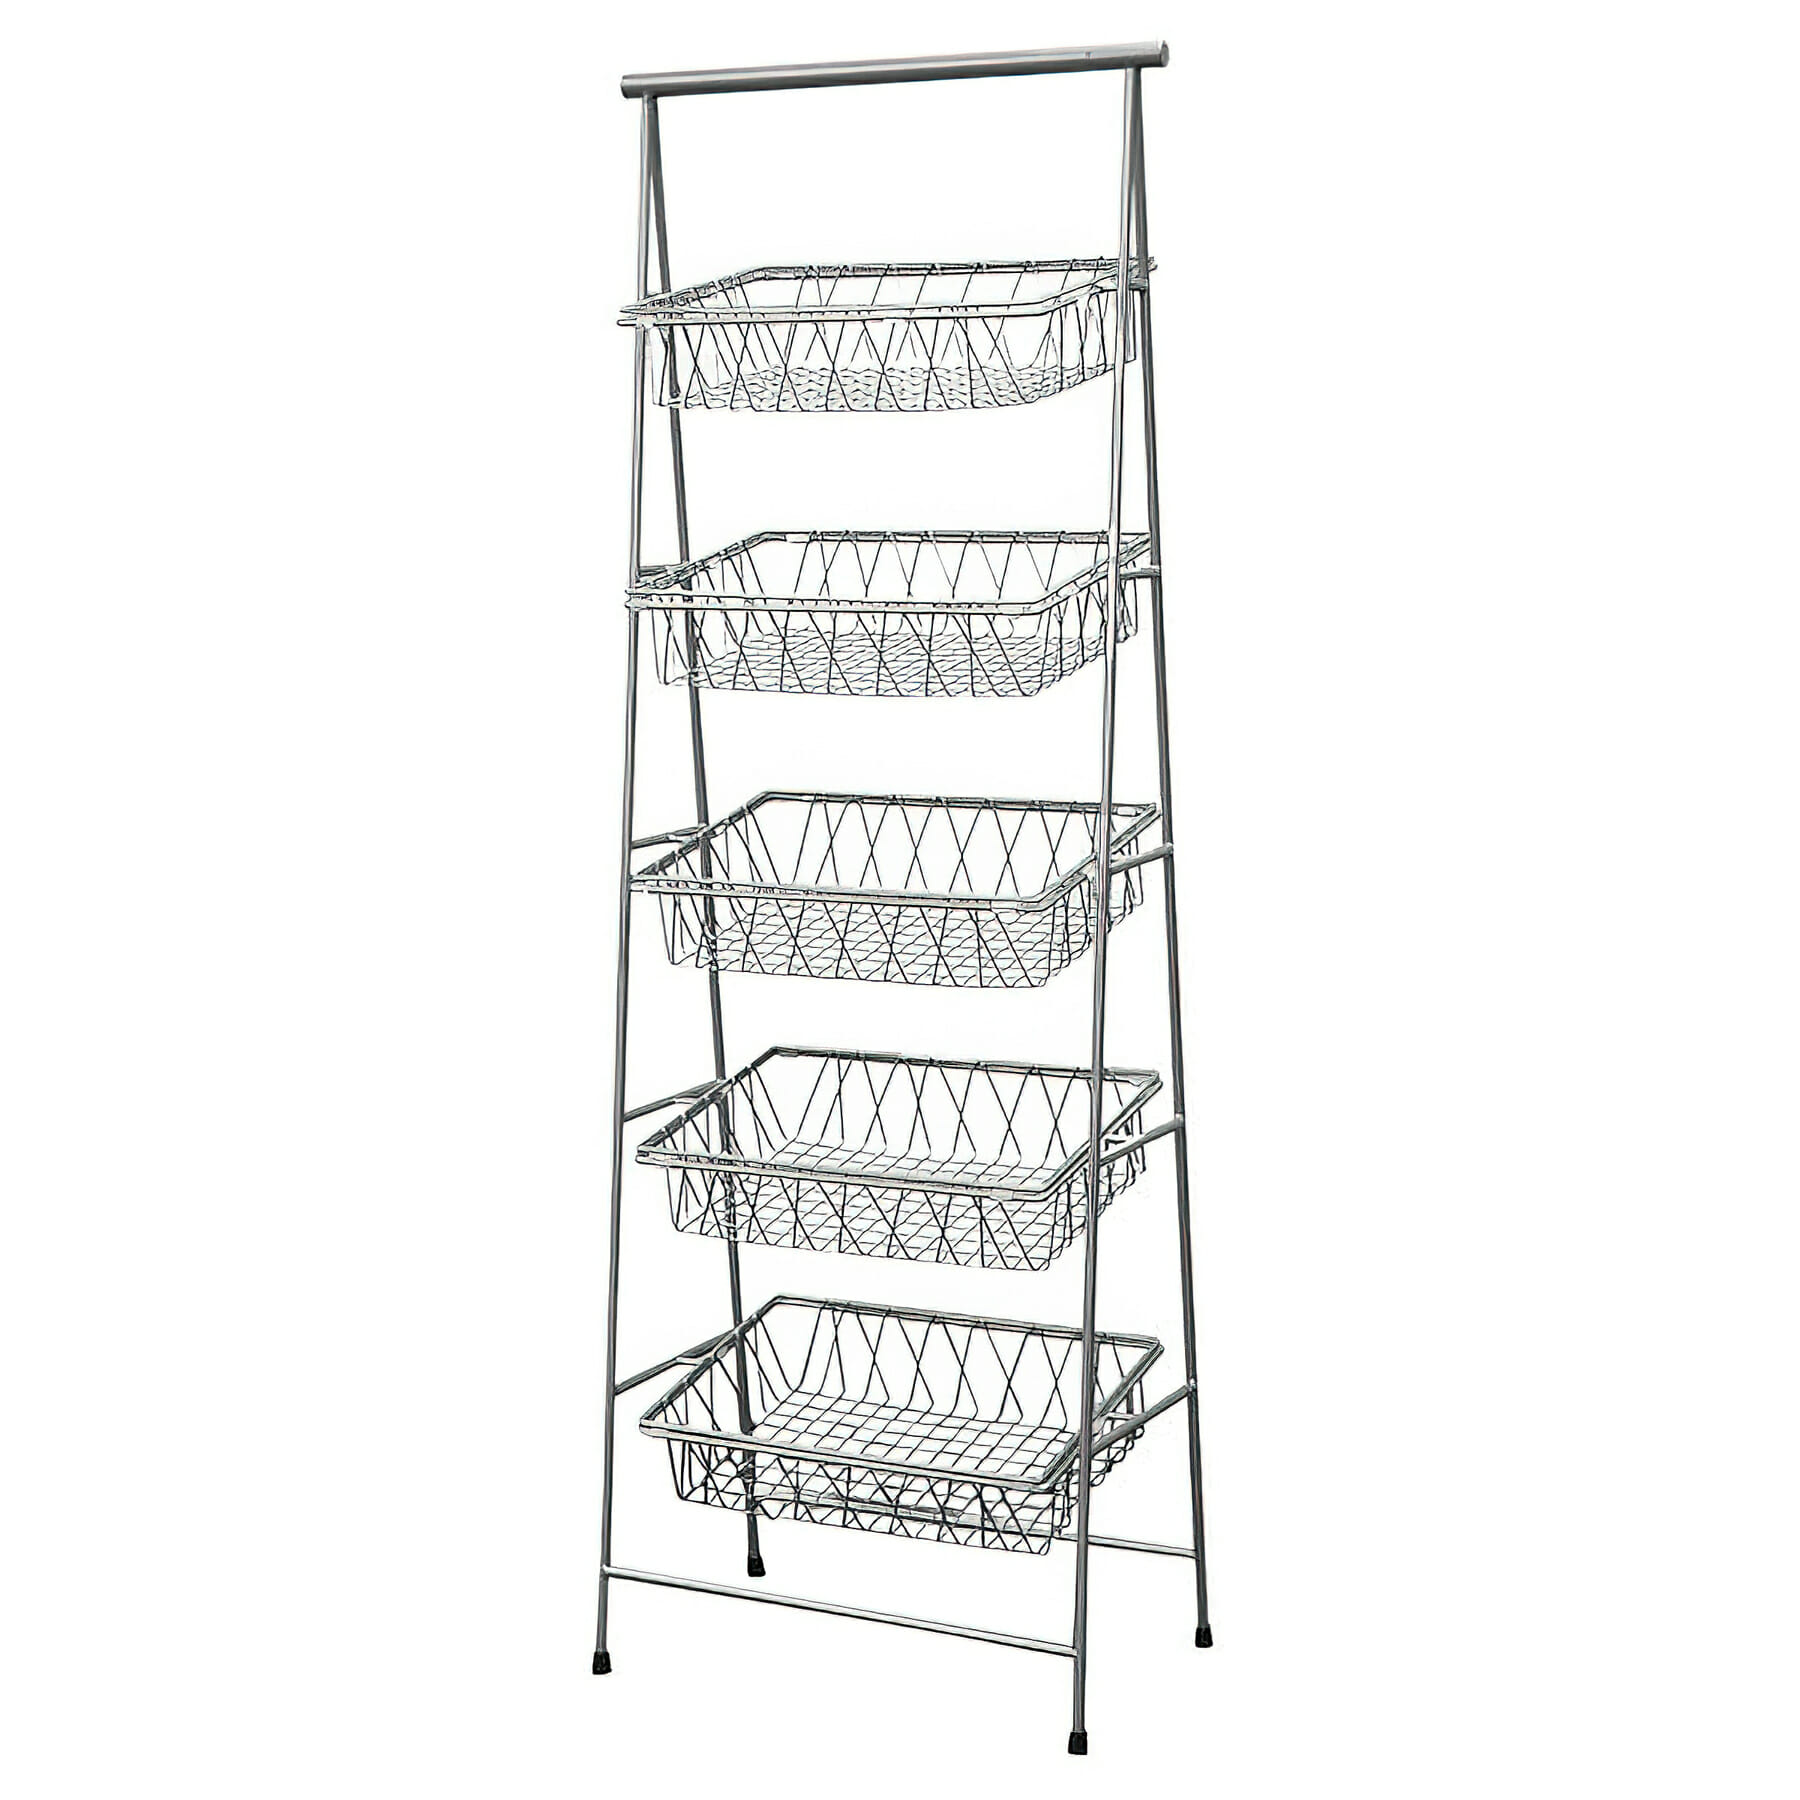 23.5" x 14" Rectangular 5-Tier Tilted Pane Stand, 64" tall (fits IR-903, IR-904, BAMTRY-01, BAMTRY-02, WB-953, WB-954)